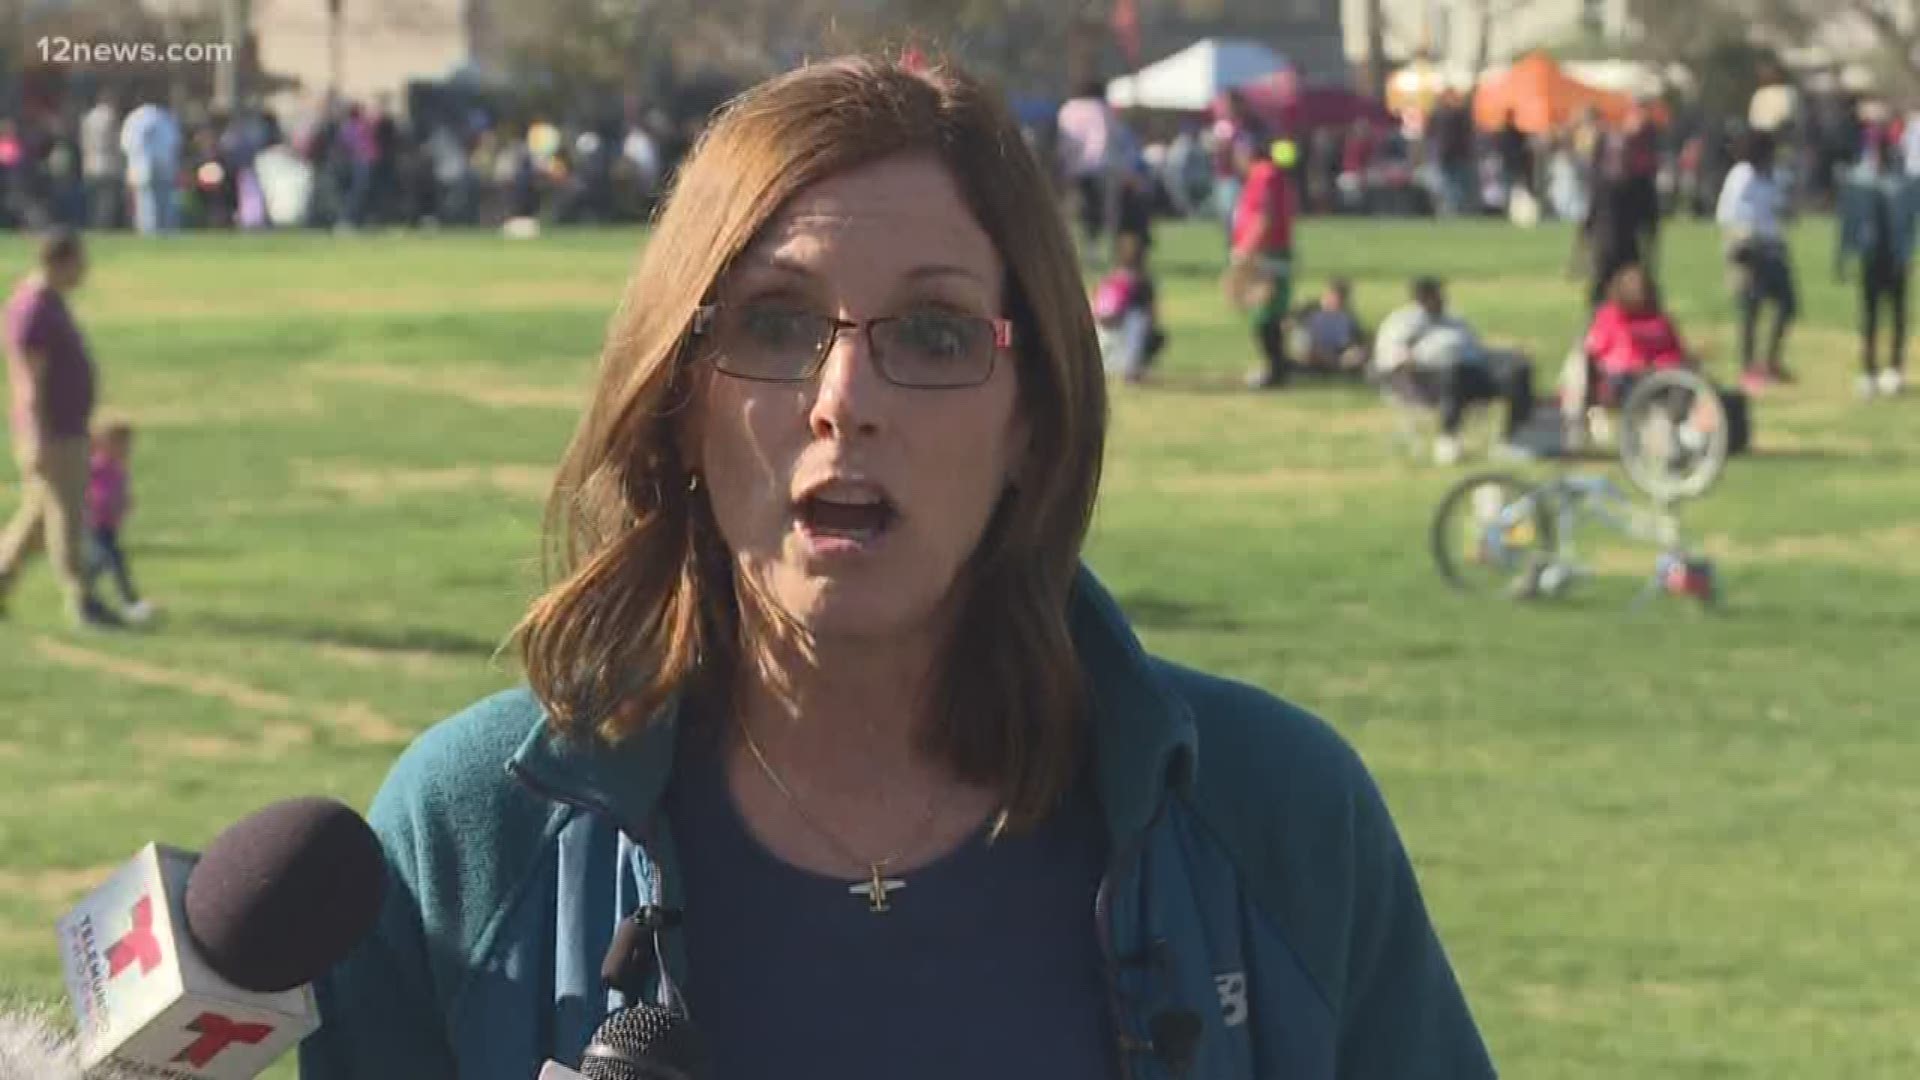 Senator Martha McSally attended the Martin Luther King Jr. march this morning. While there she spoke about how she hopes the government shutdown will be resolved.